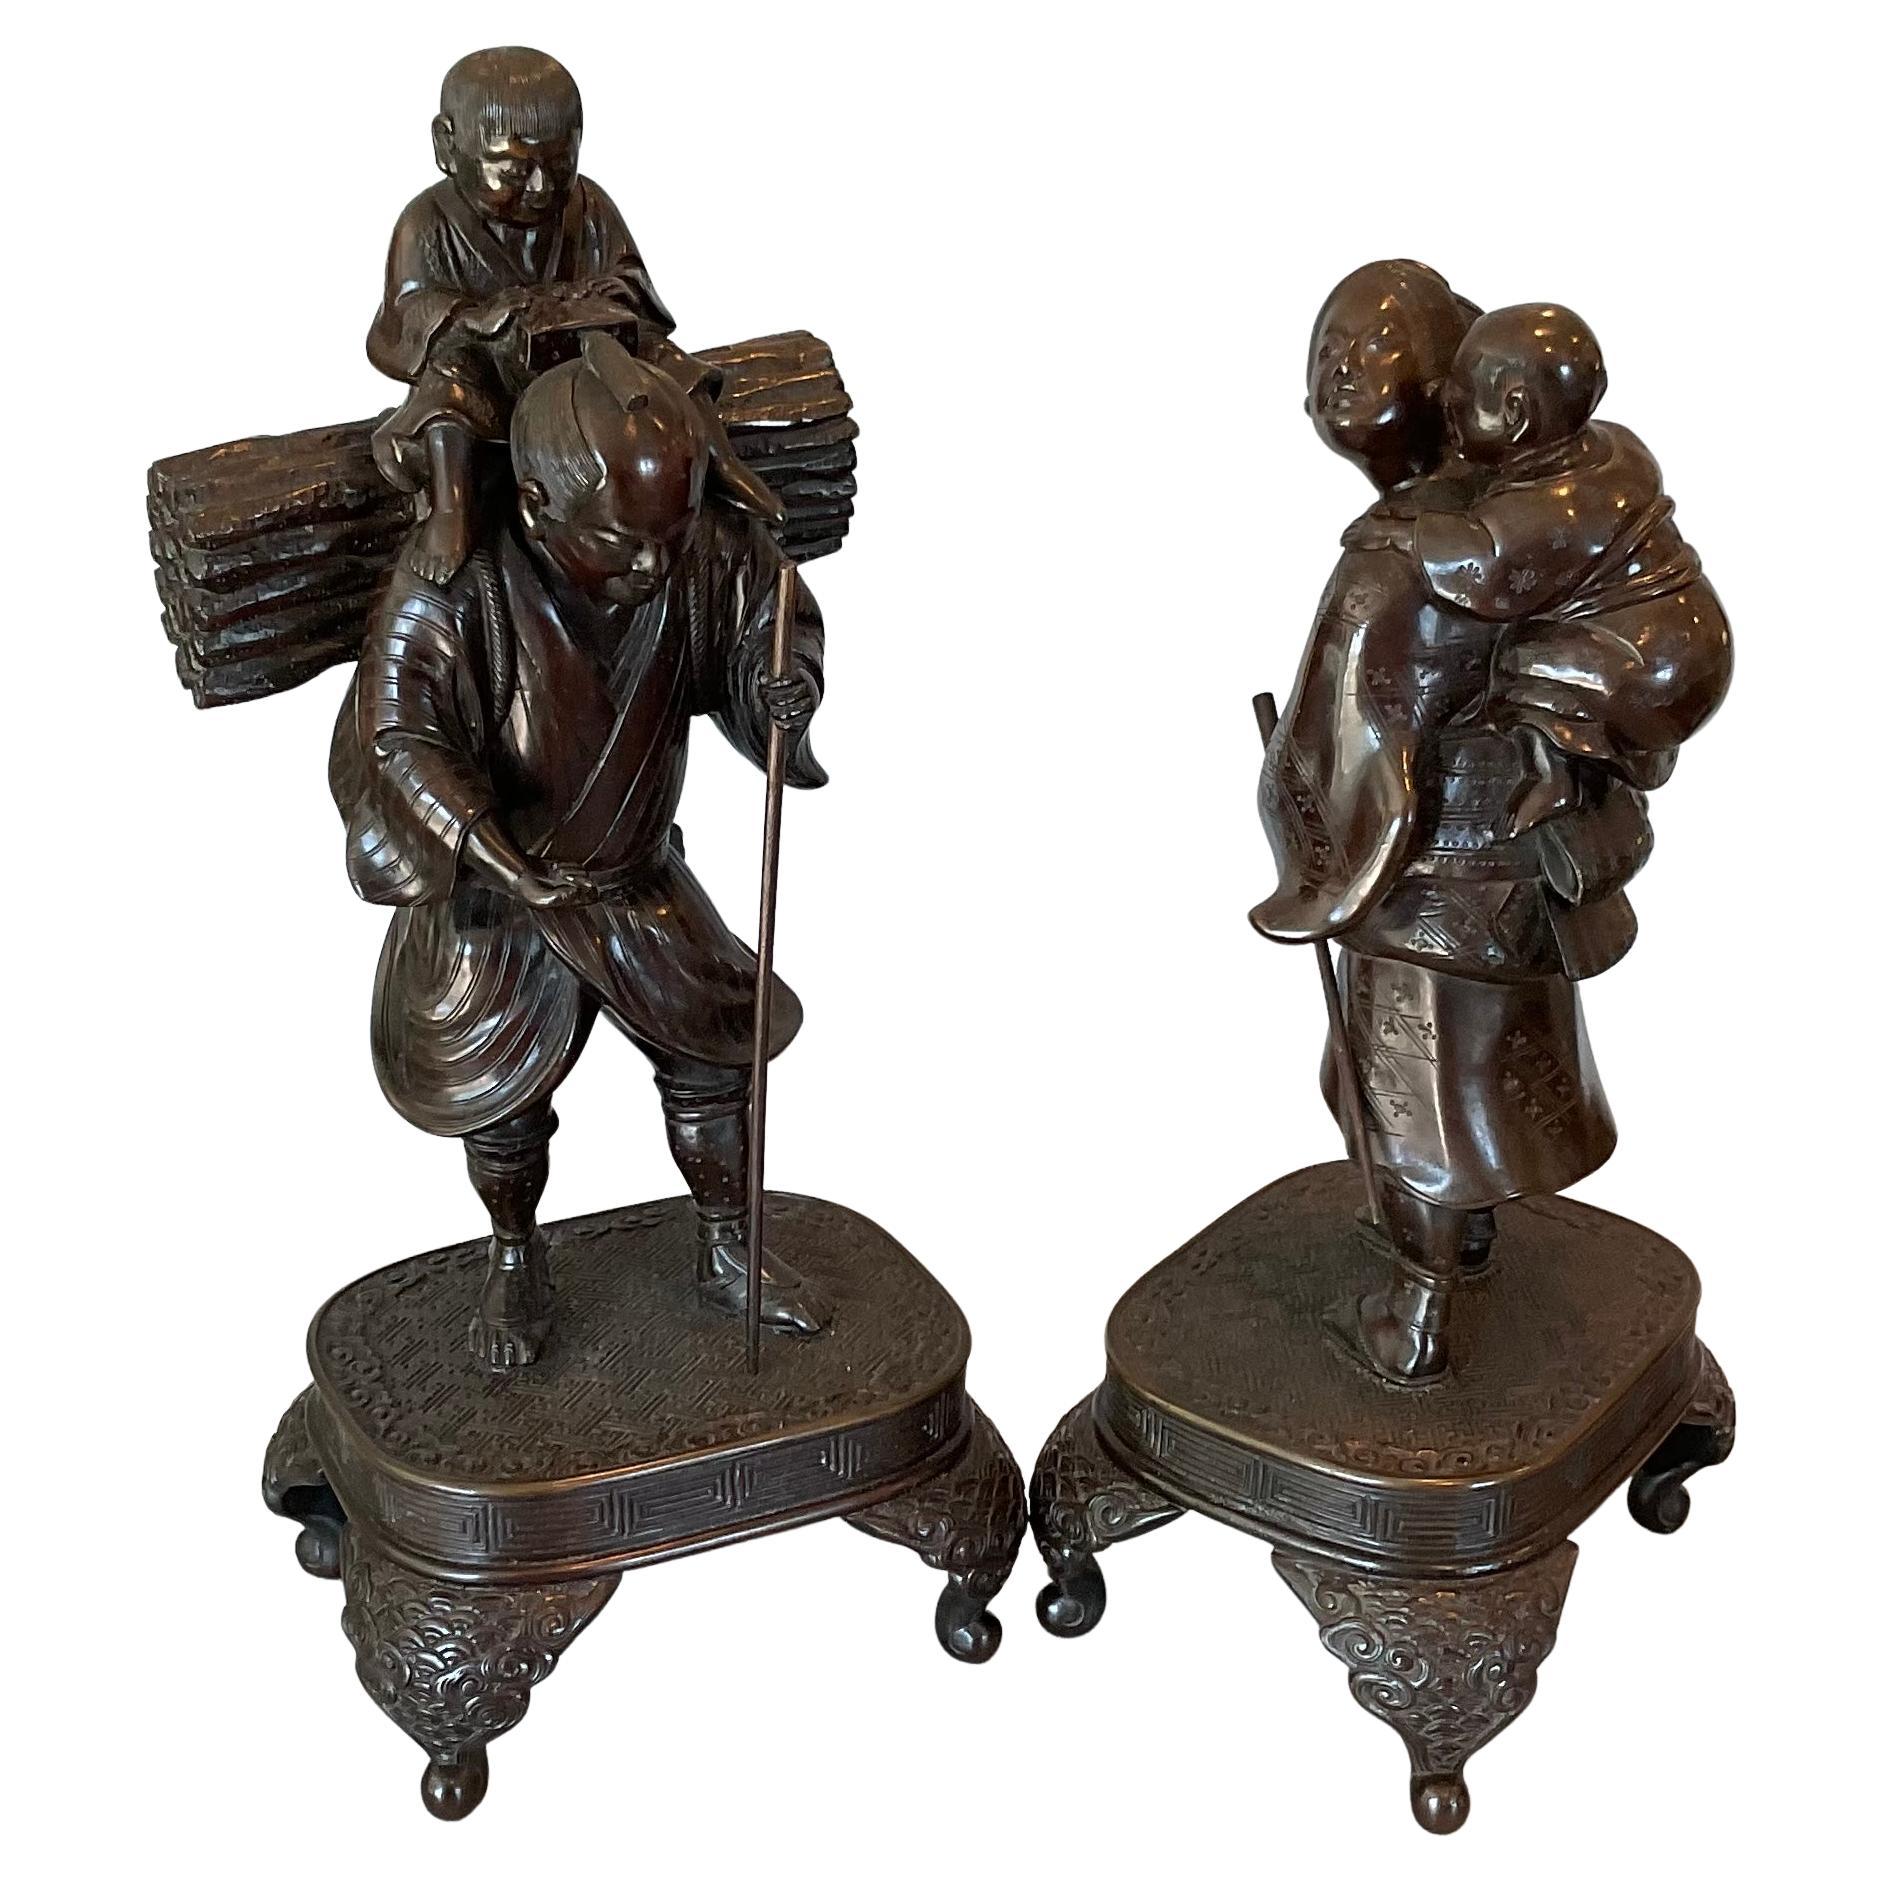 Pair Meiji Period Bronze Figural Hiking Family Sculpture Incredible Detail Stand